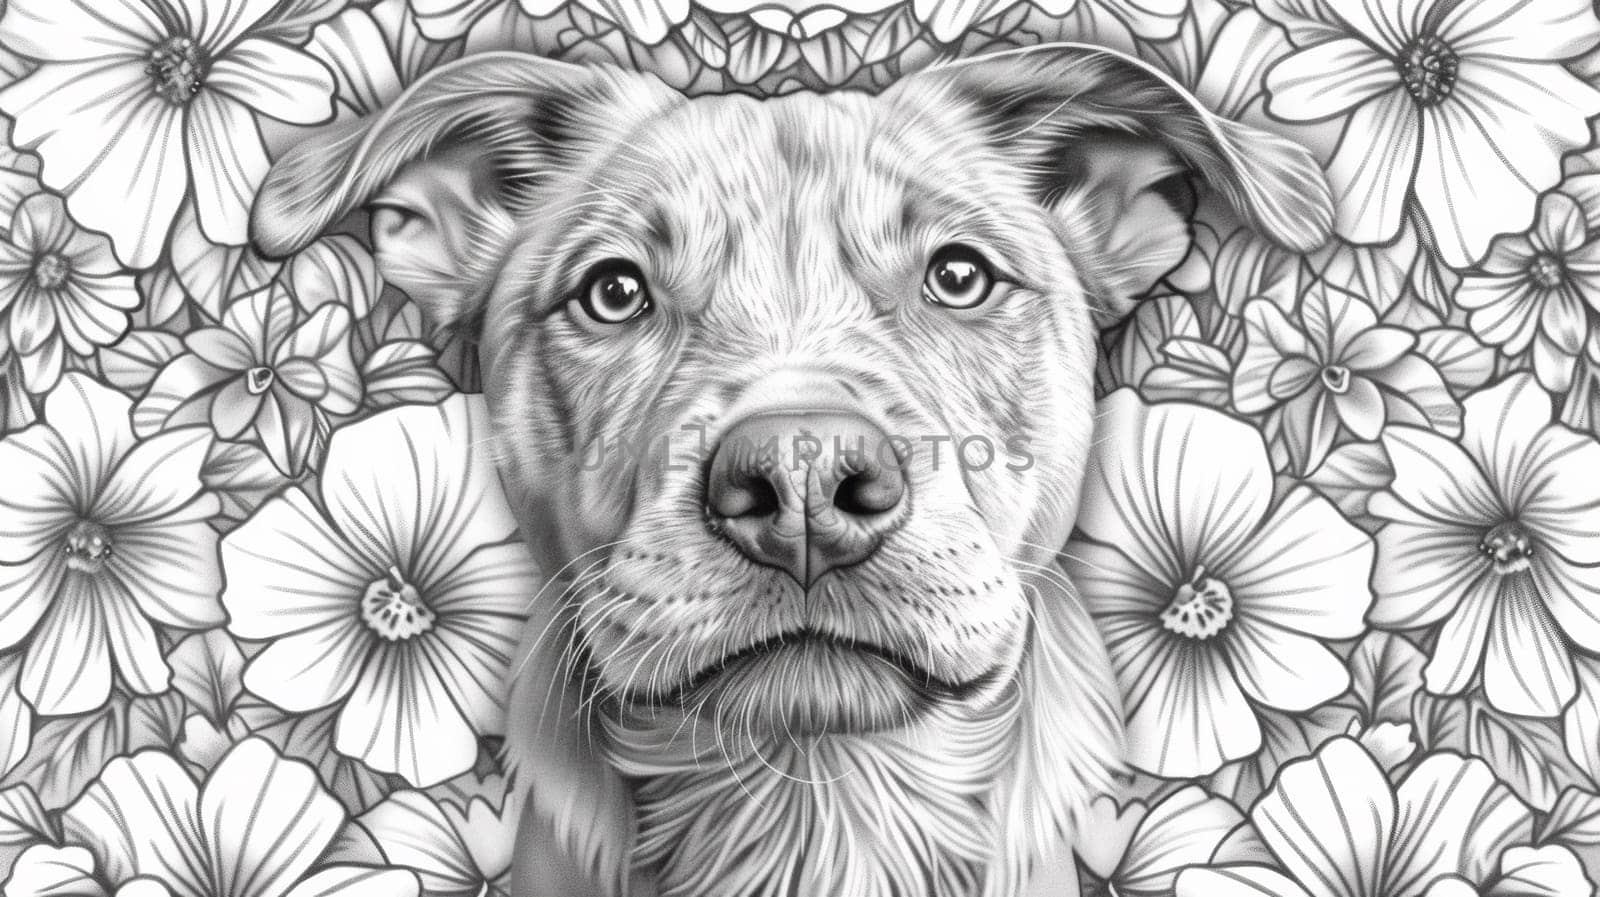 A dog is surrounded by flowers in a black and white drawing